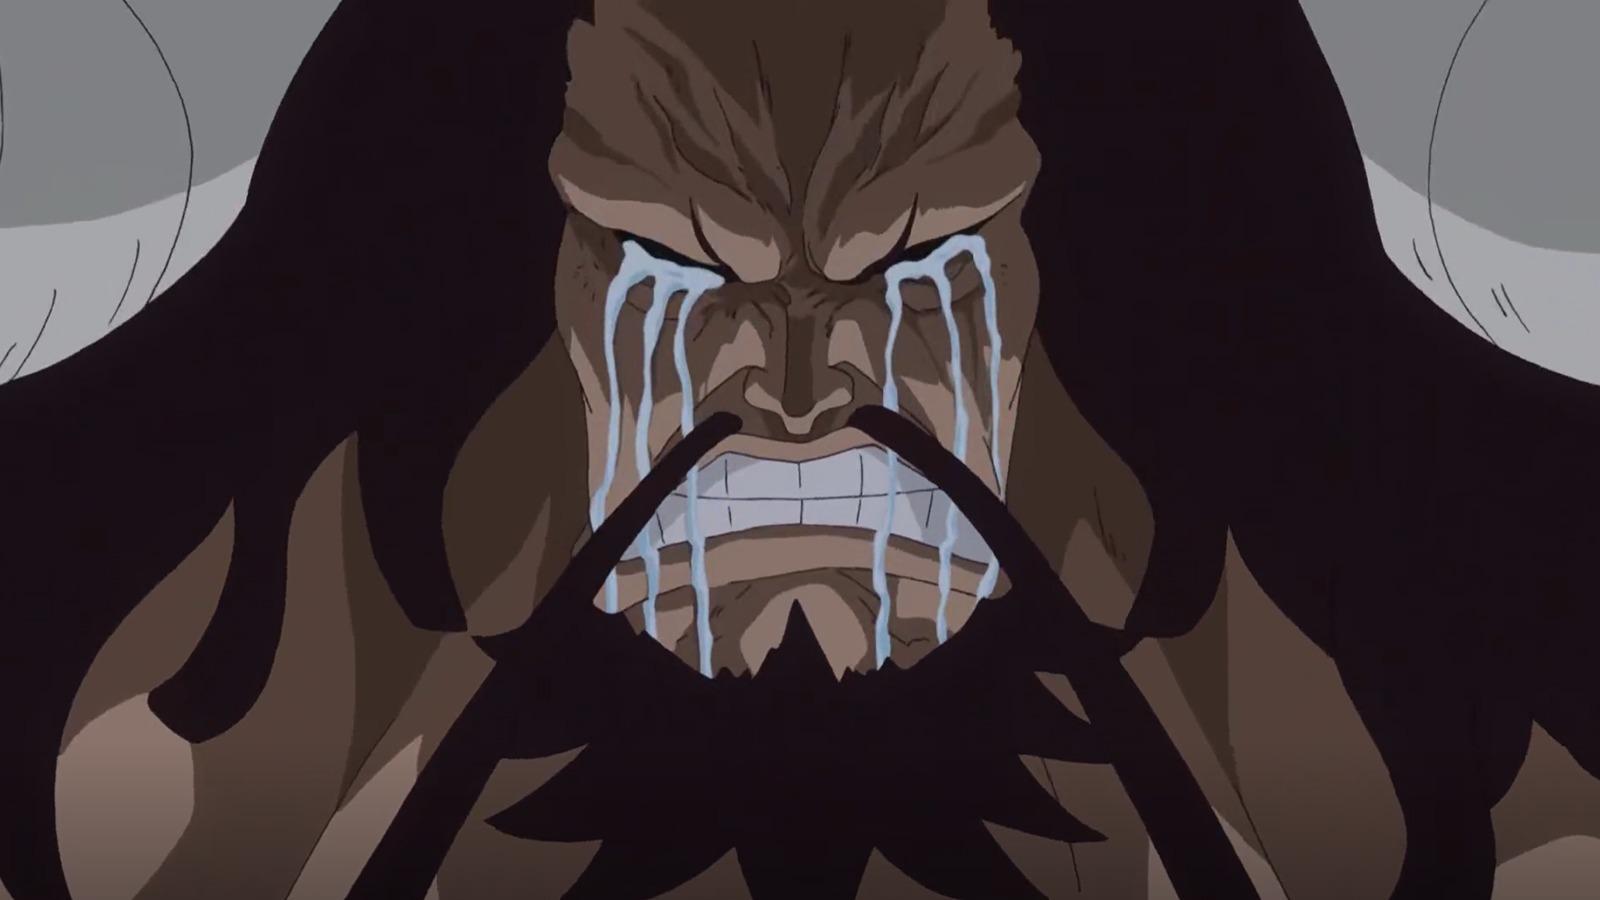 An image of Kaido from One Piece